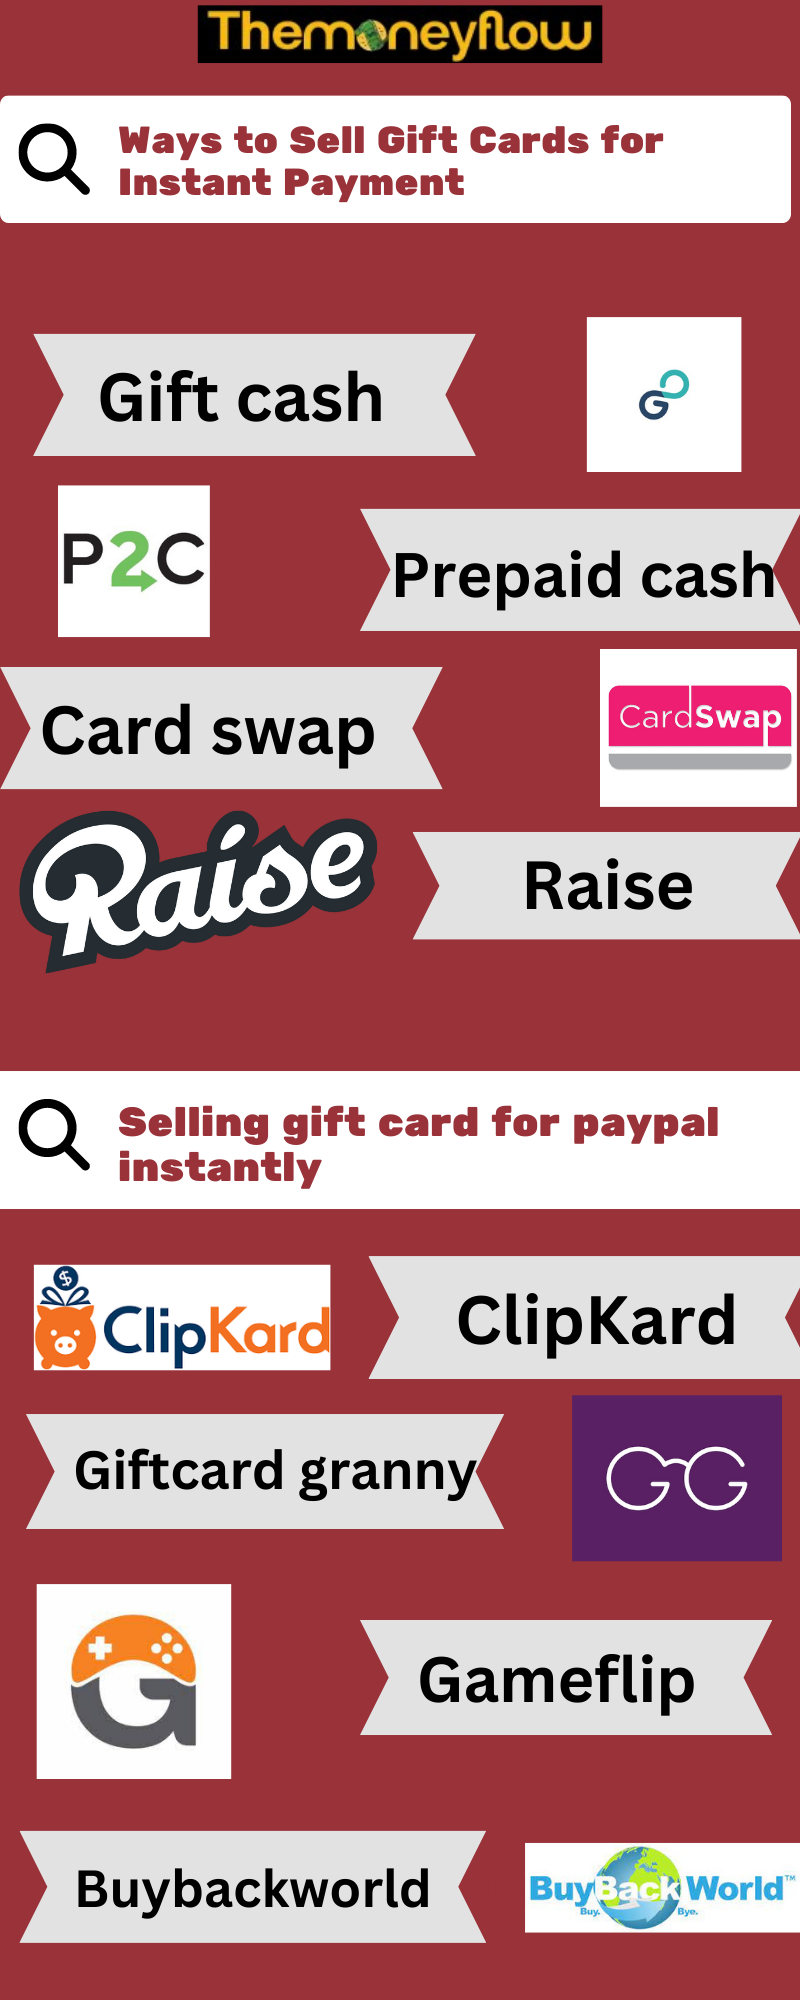 Ways to Sell Gift Cards for Instant Payment